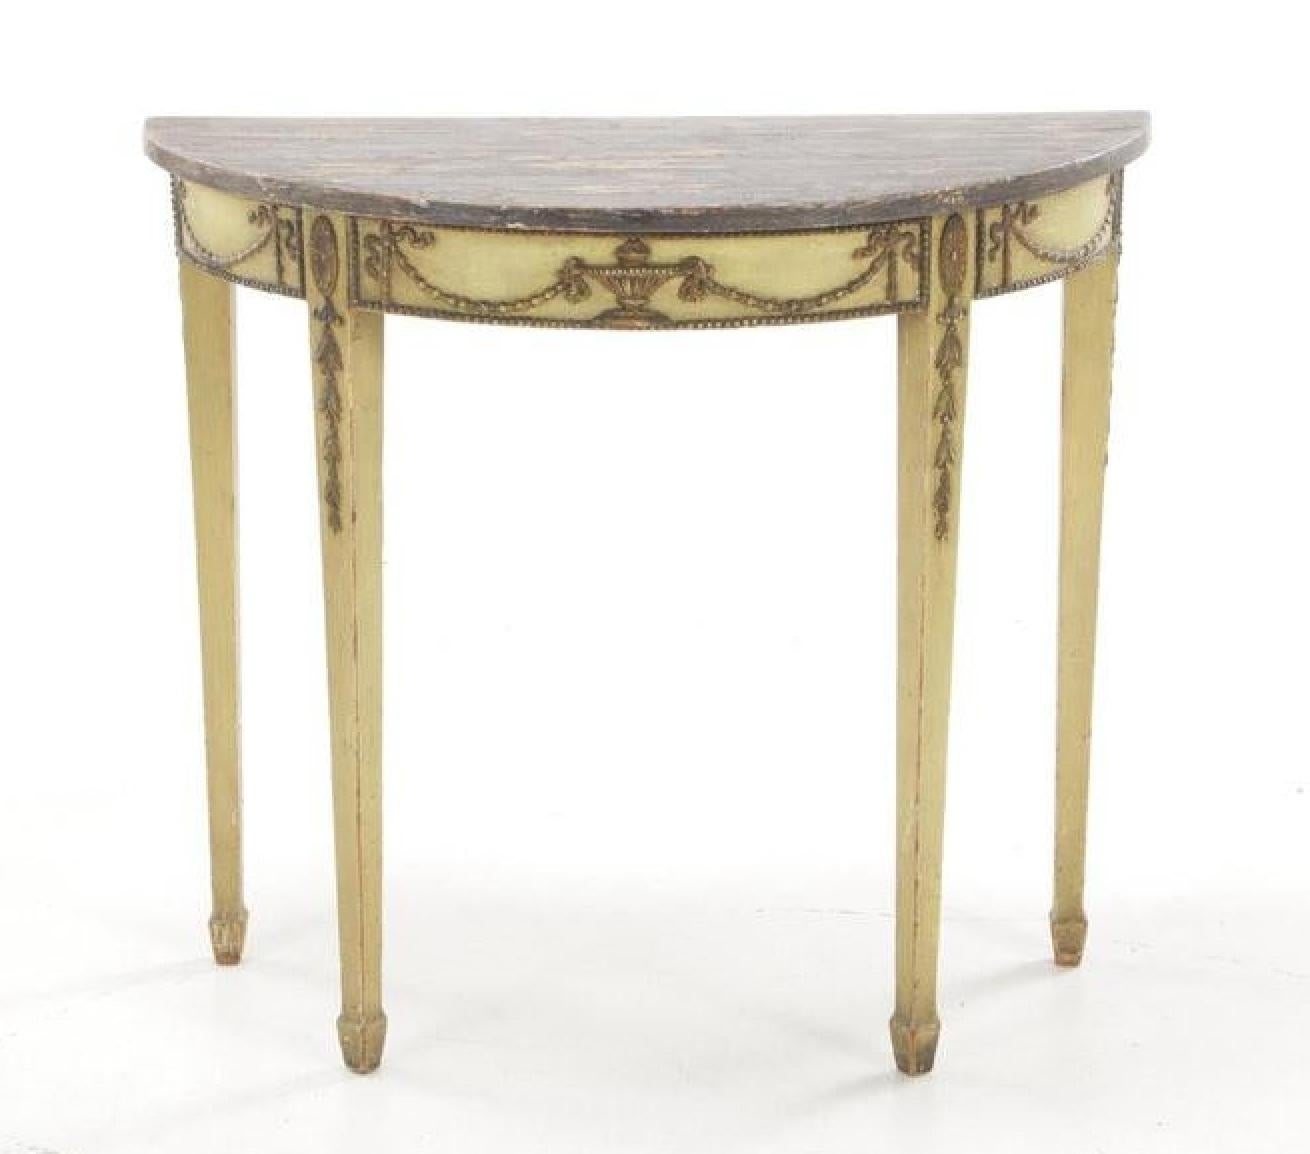 A beautiful painted Adam-style demilune console table with urn & swag details

Circa early 20th century

Measures: 36